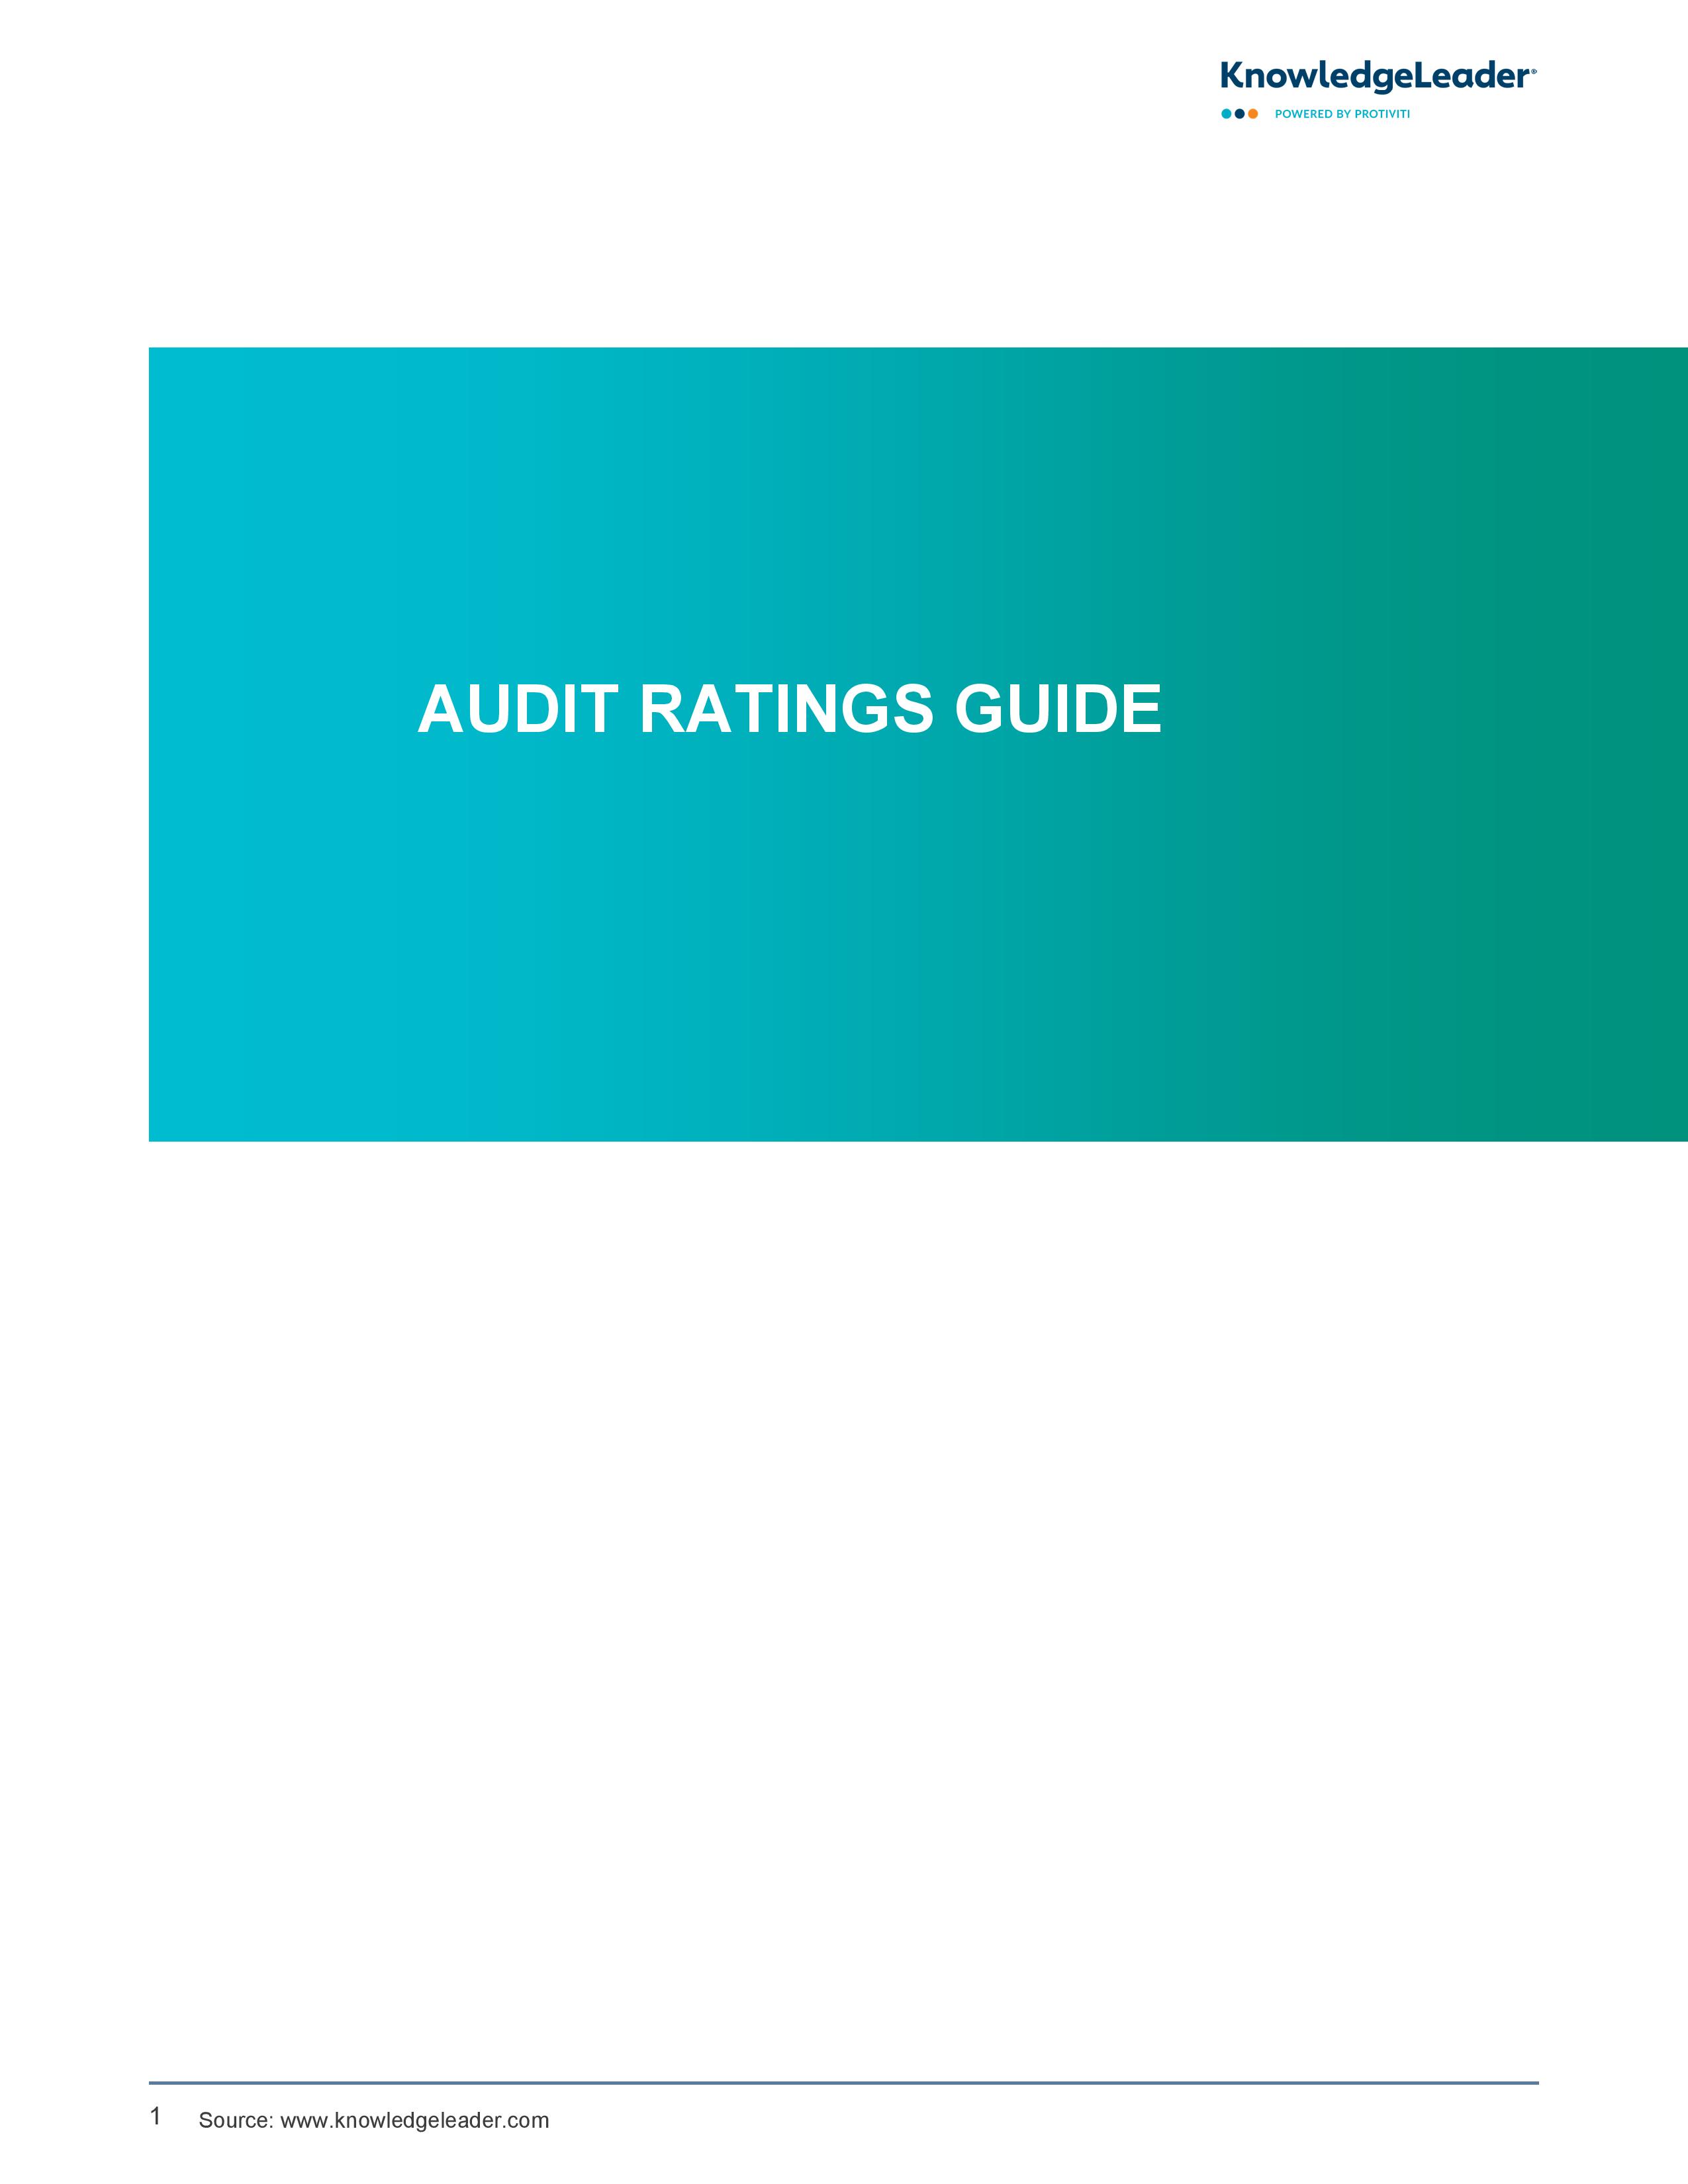 screenshot of the first page of Audit Ratings Guide